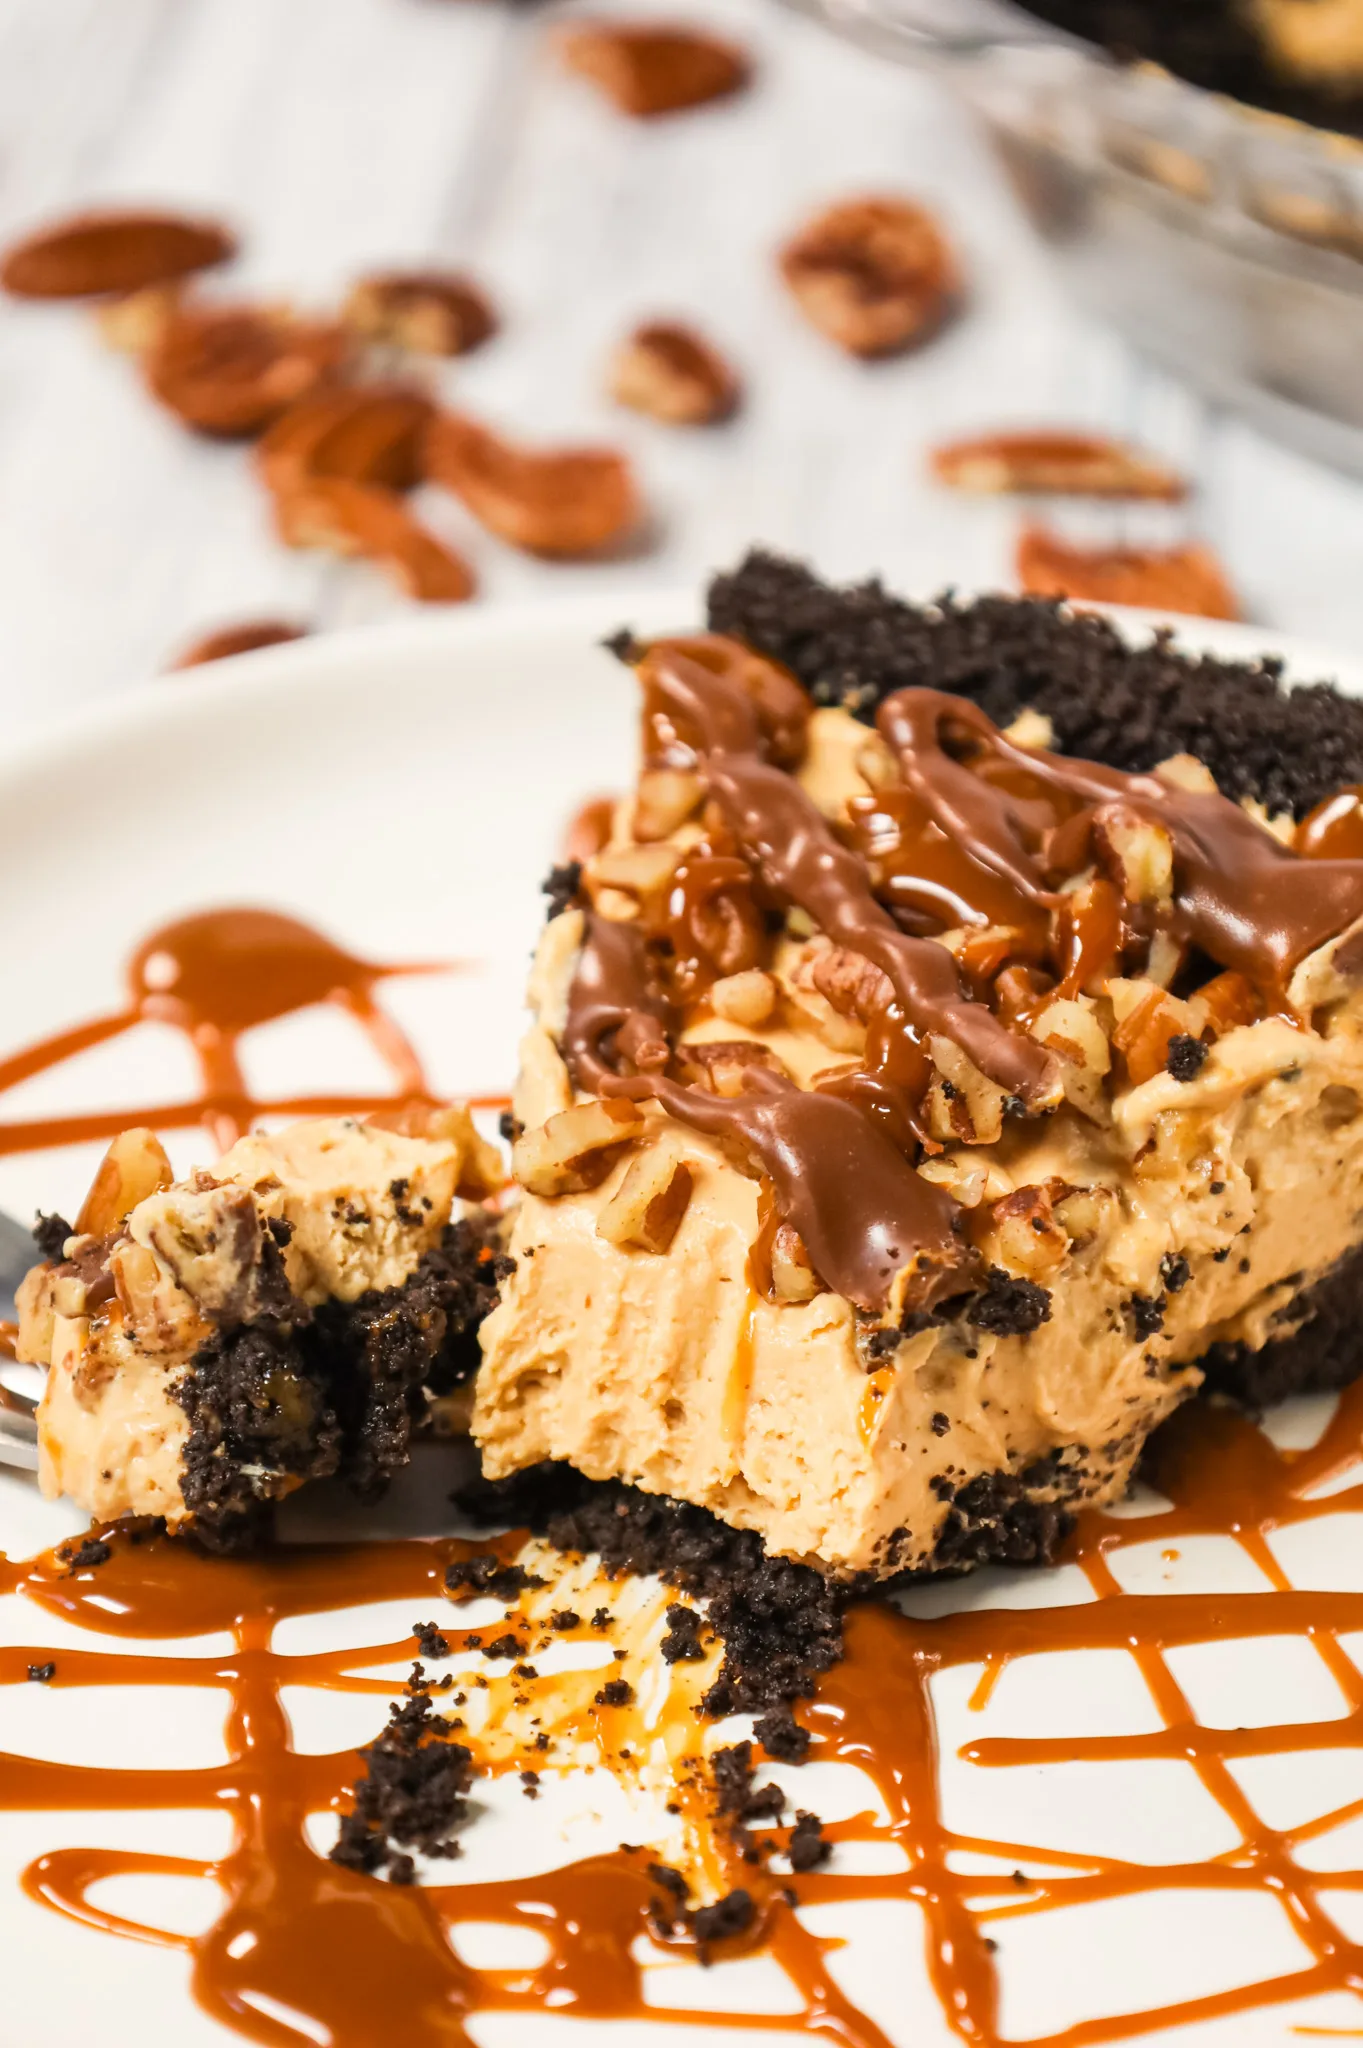 Turtle Pie is a delicious no bake cheesecake pie with in an Oreo crust and loaded with caramel sauce, milk chocolate and chopped pecans.